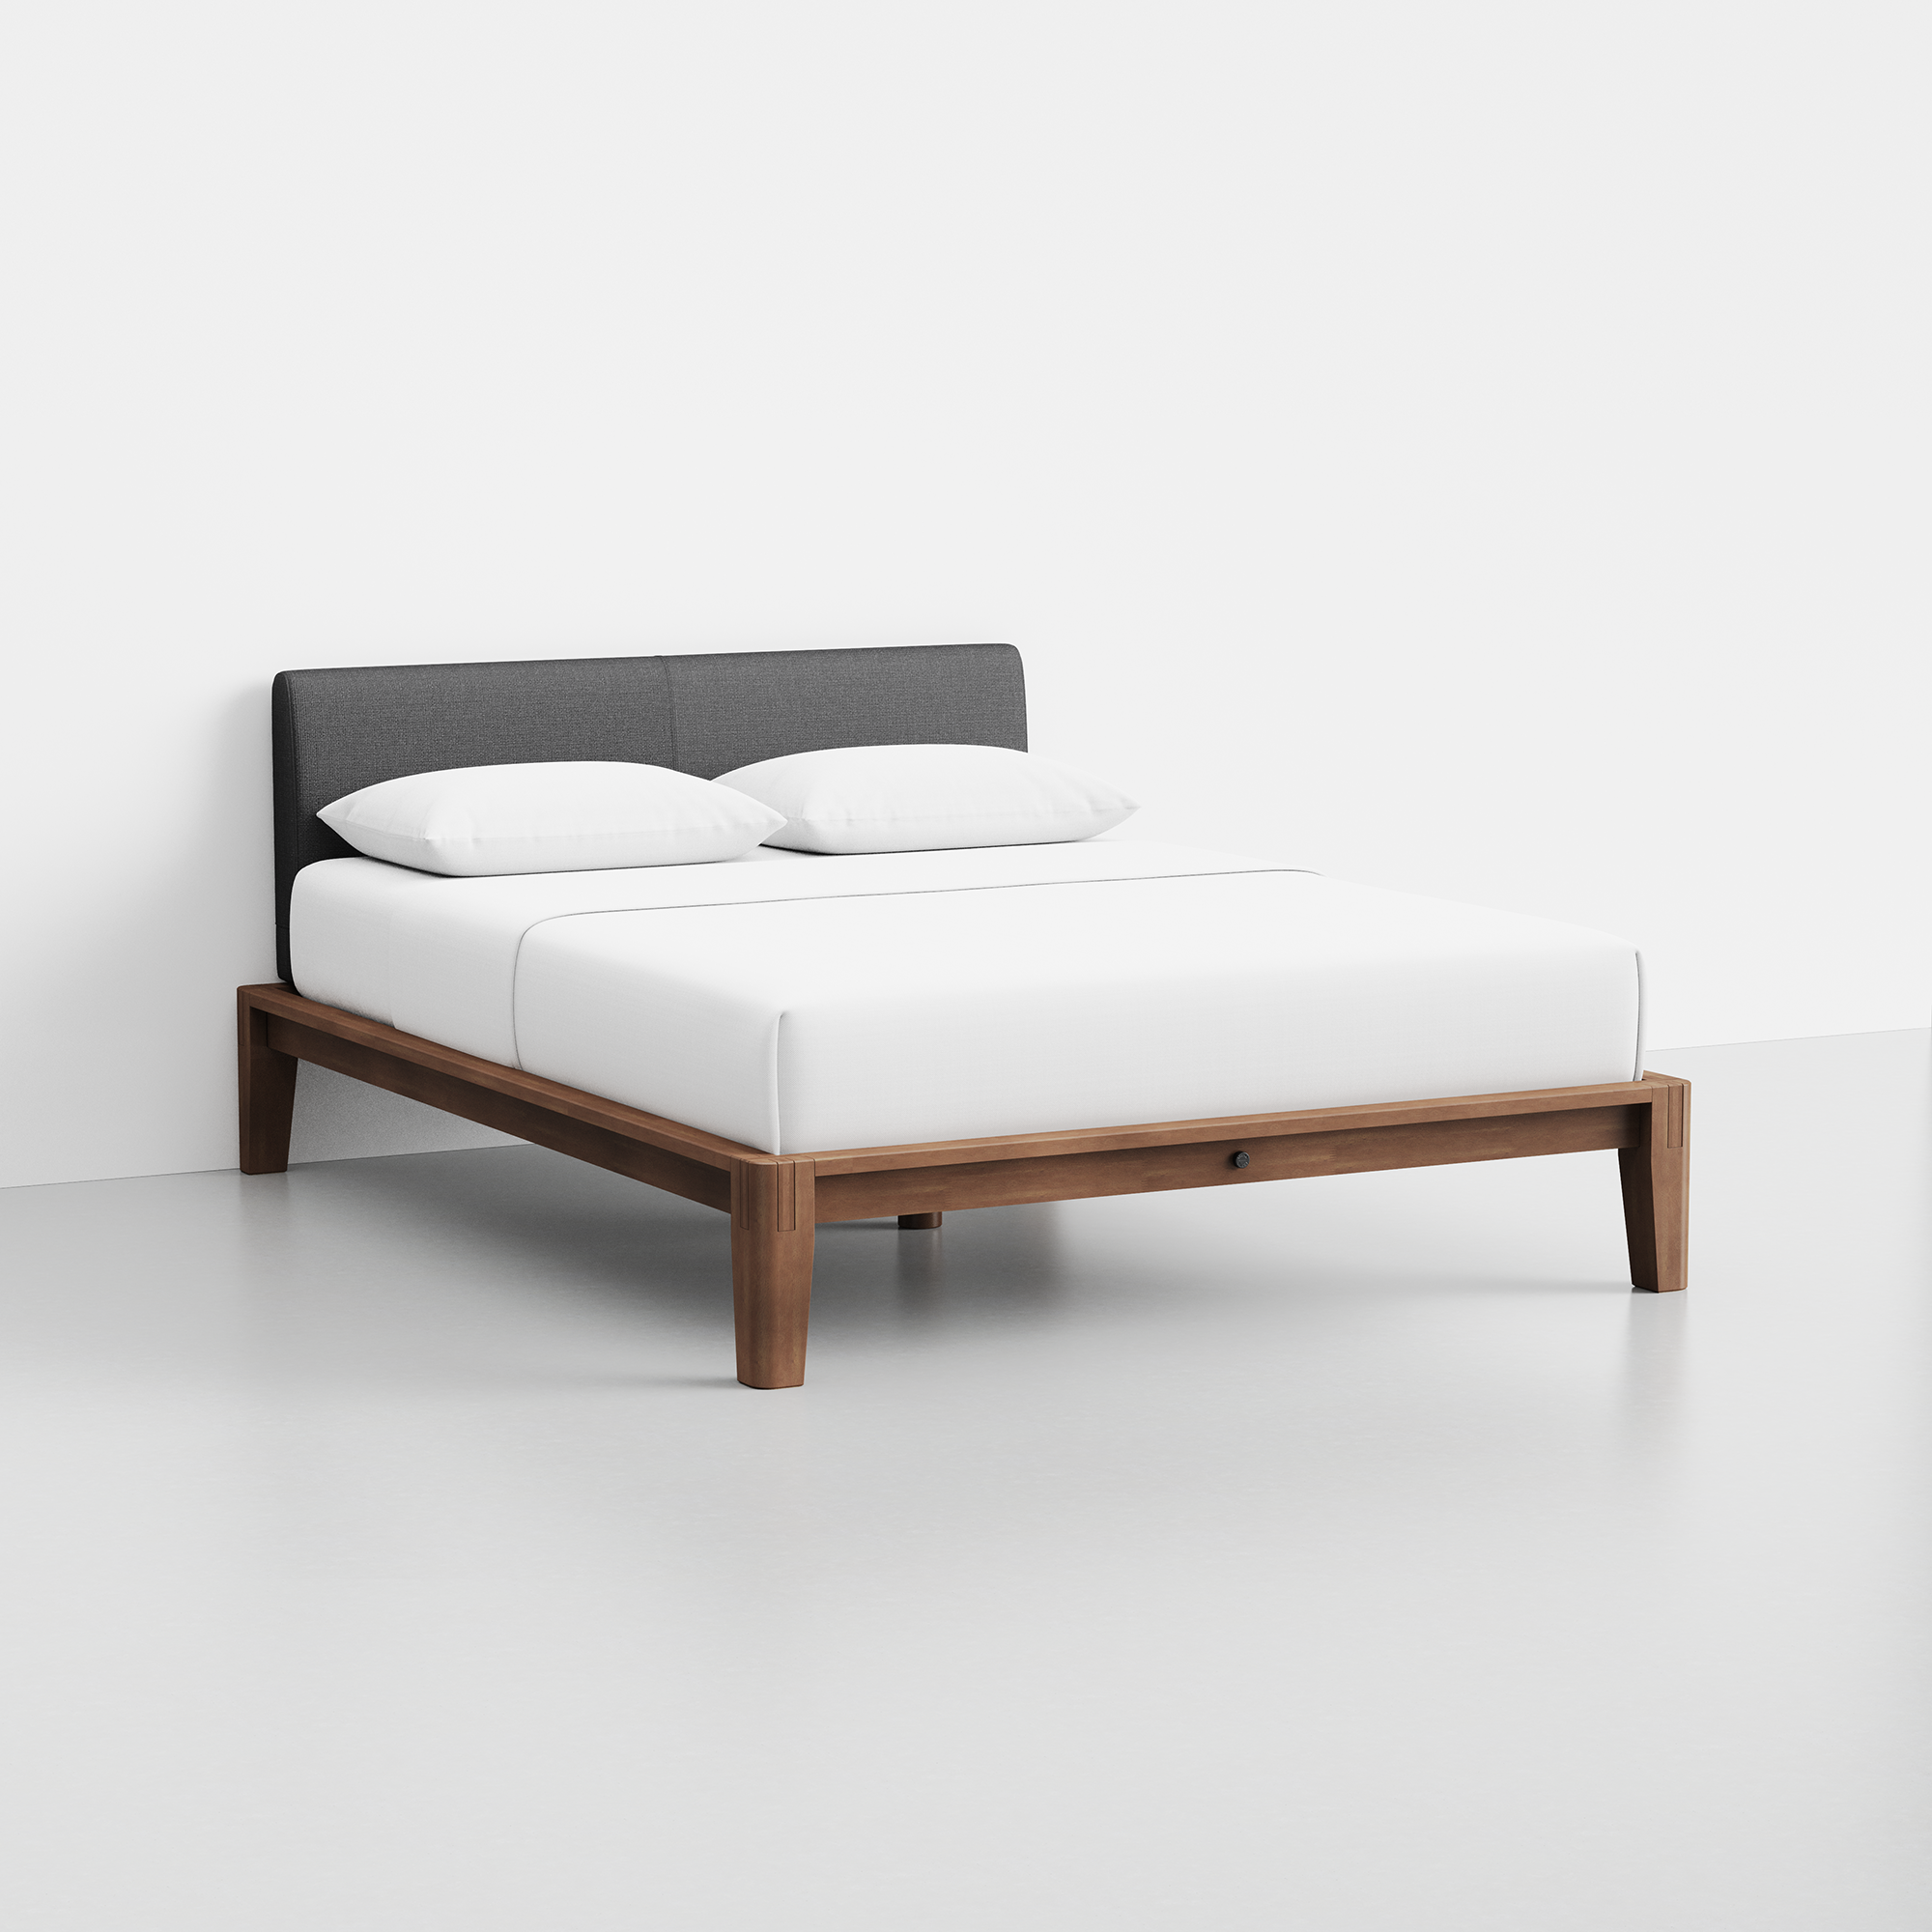 The Bed (Walnut / Dark Charcoal) - Render - Angled